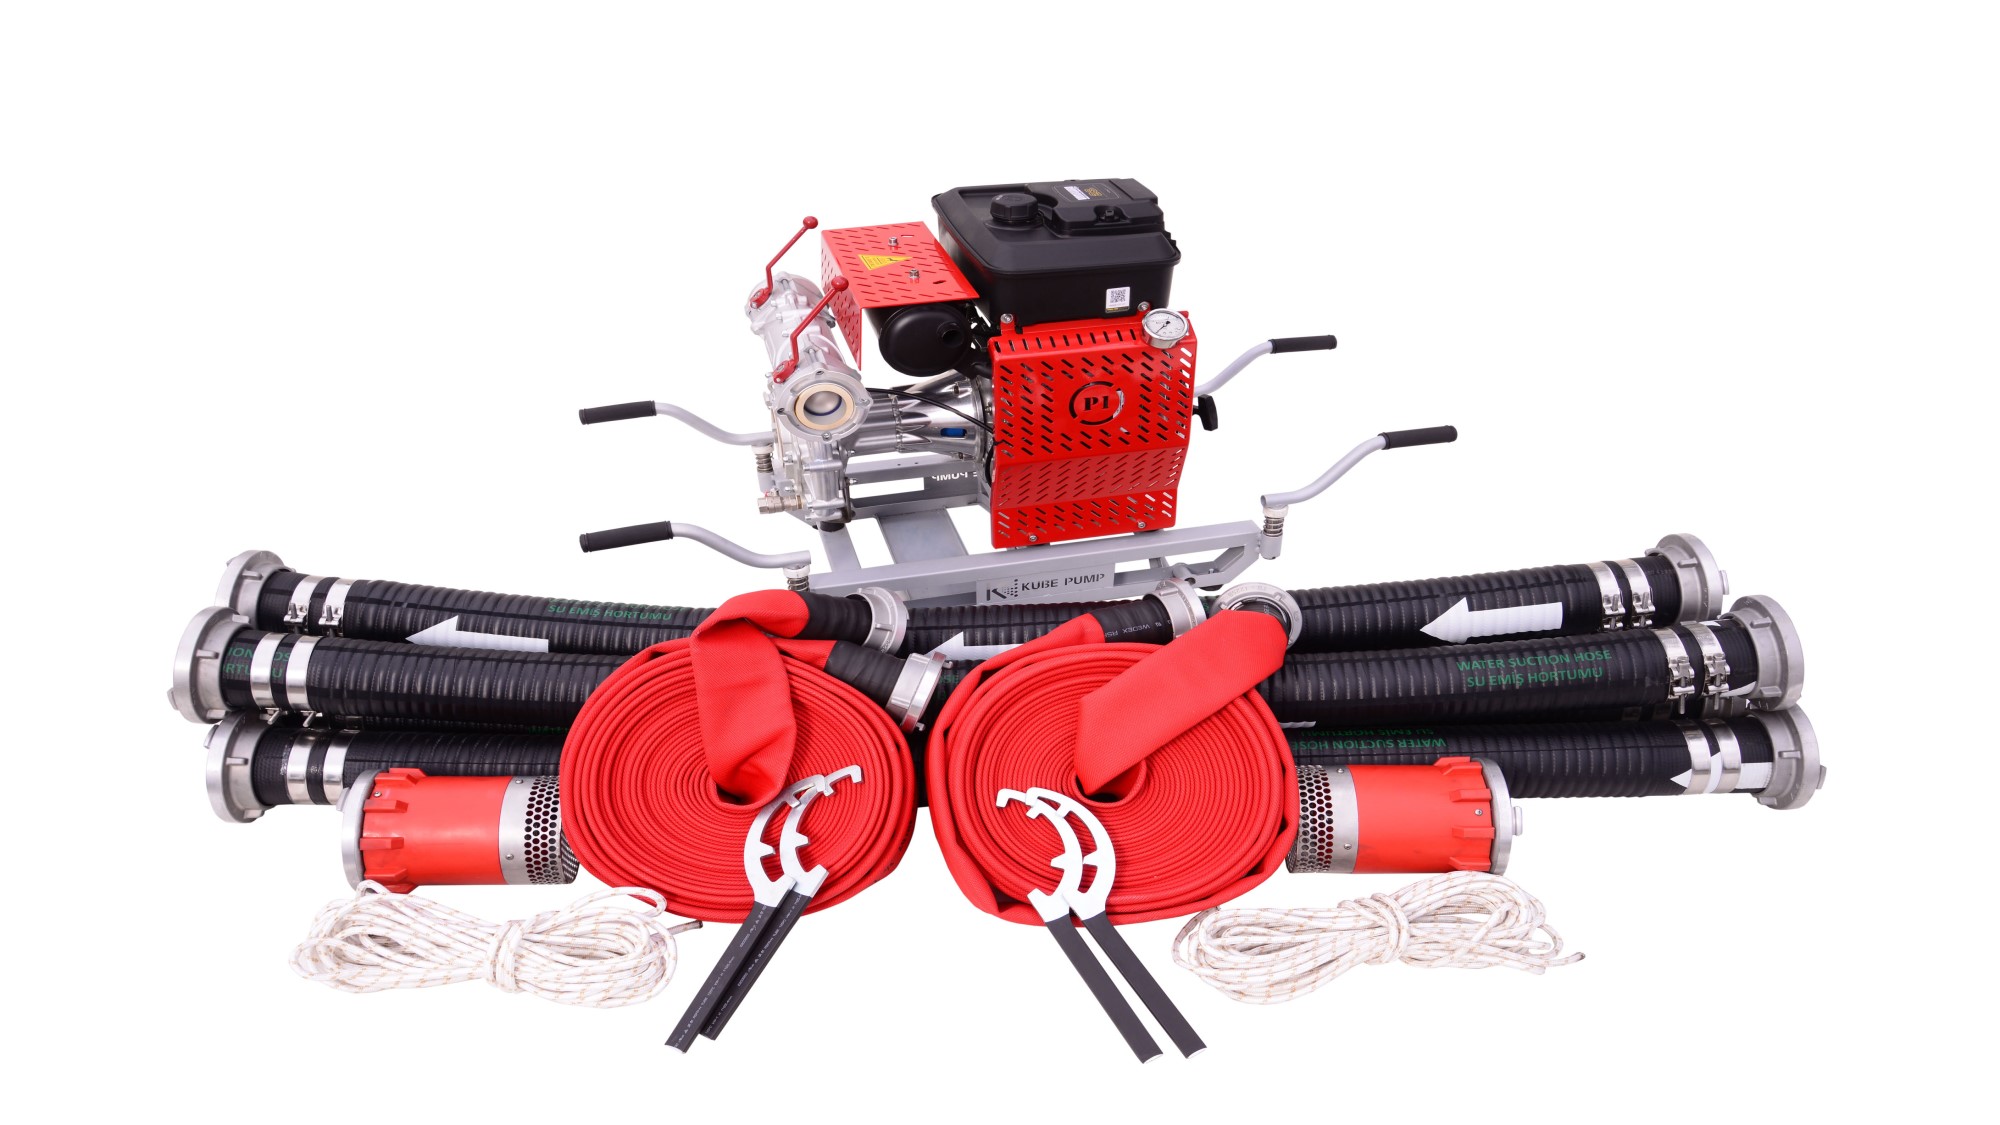 NEW PRODUCT GROUP- PORTABLE FIRE PUMPS